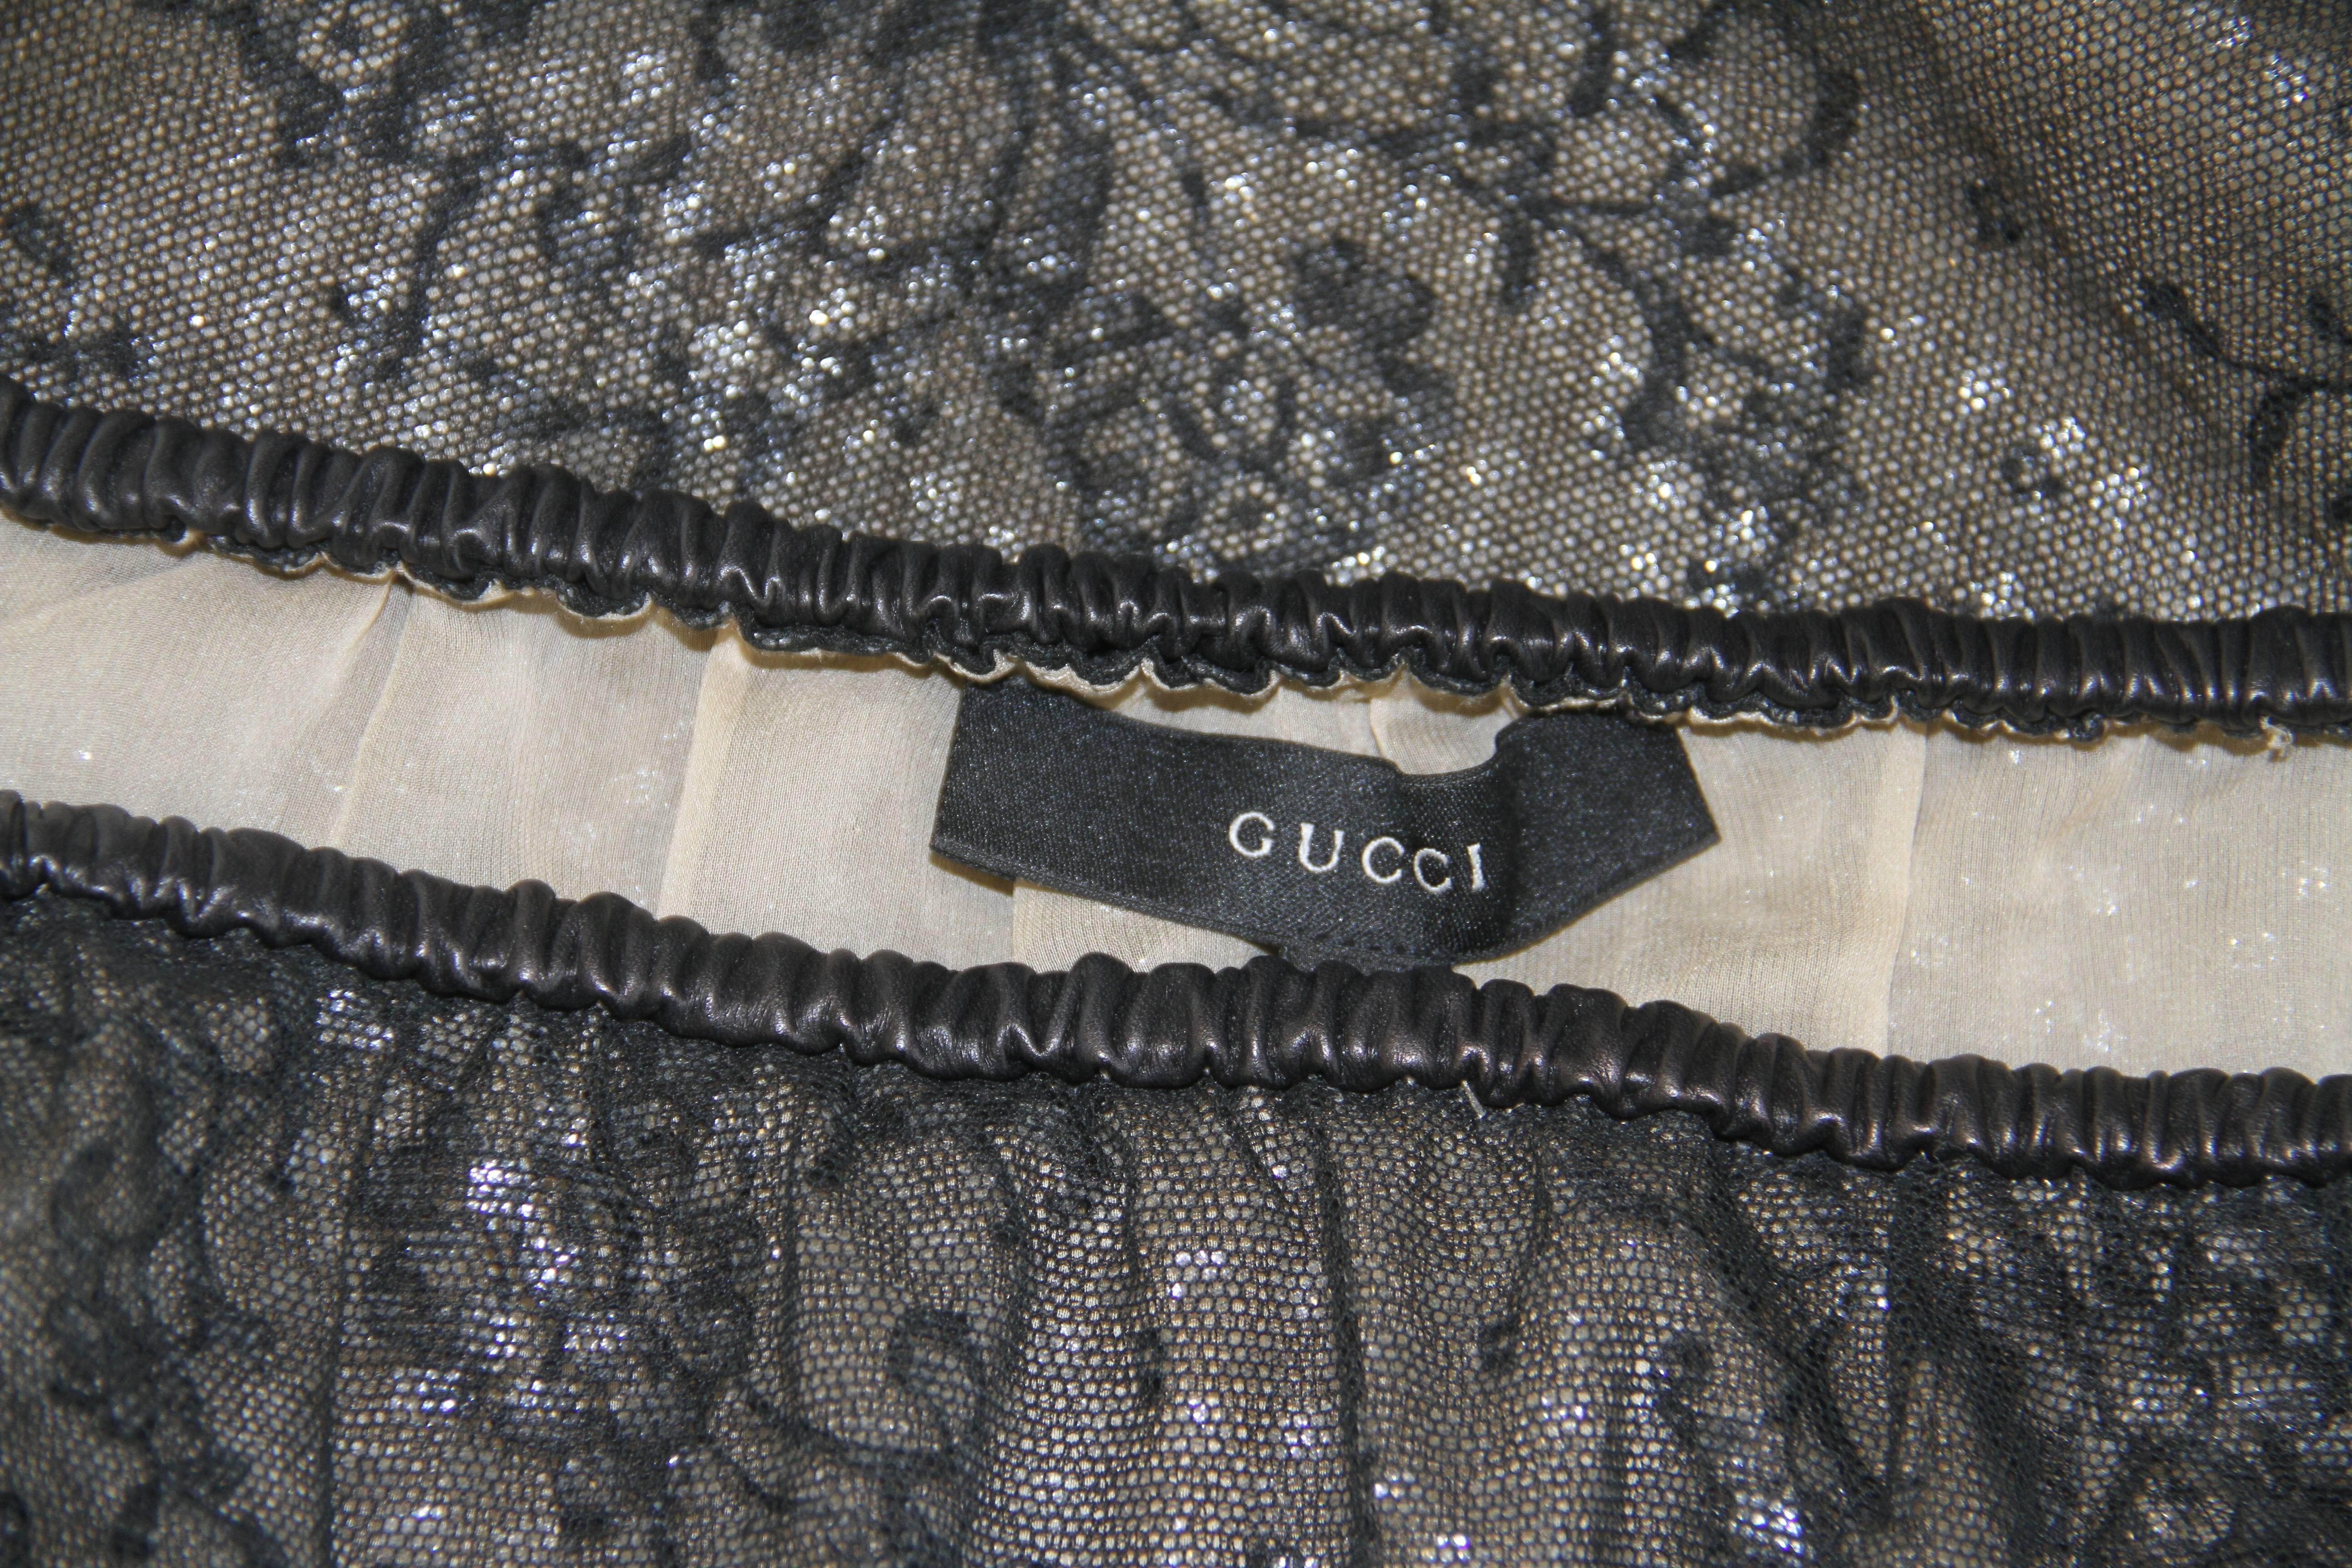 Tom Ford for Gucci lace skirt from the Fall 1999 collection. The skirt features a narrow black leather waistband.

Marked an Italian size 38.

Manufacturer - Zamasport S.p.a.

Fabric content - 37% cotton / 33% nylon / 30% silk